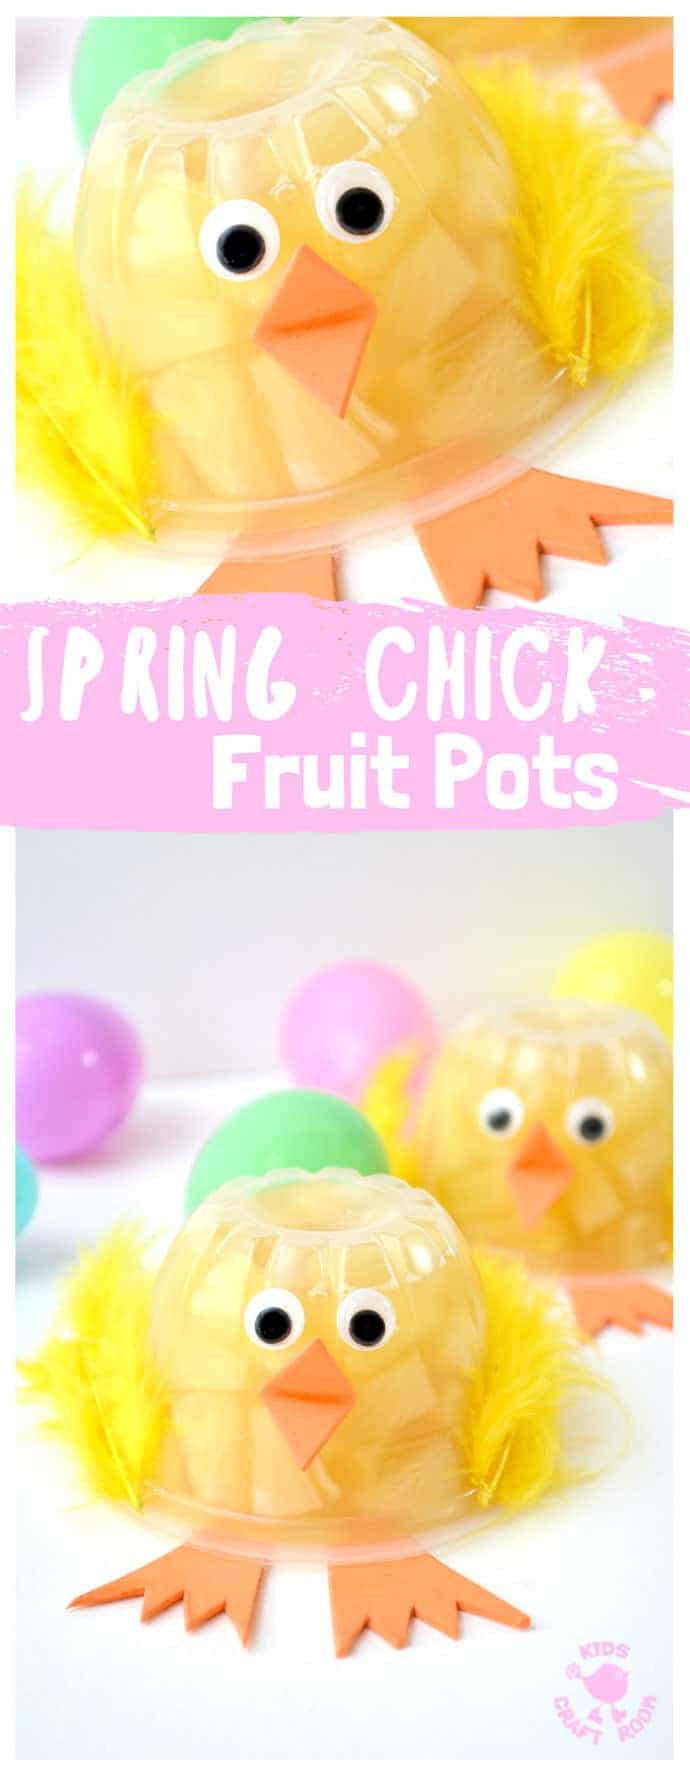 Spring Chick Fruit Cups - a healthy treat your kids will love! They're easy to make and such a fun way to celebrate Spring and Easter. Chick fruit pots work really well as a non-candy Easter basket idea and you can pop them into lunchboxes too. A great way to encourage kids to get one of their daily portions of fruit. #easter #eastercrafts #eastertreats #kidscrafts #craftsforkids #healthyfood #easterparty #chicks #chickcrafts #easterchicks #fruitcups #fruits #springcrafts 